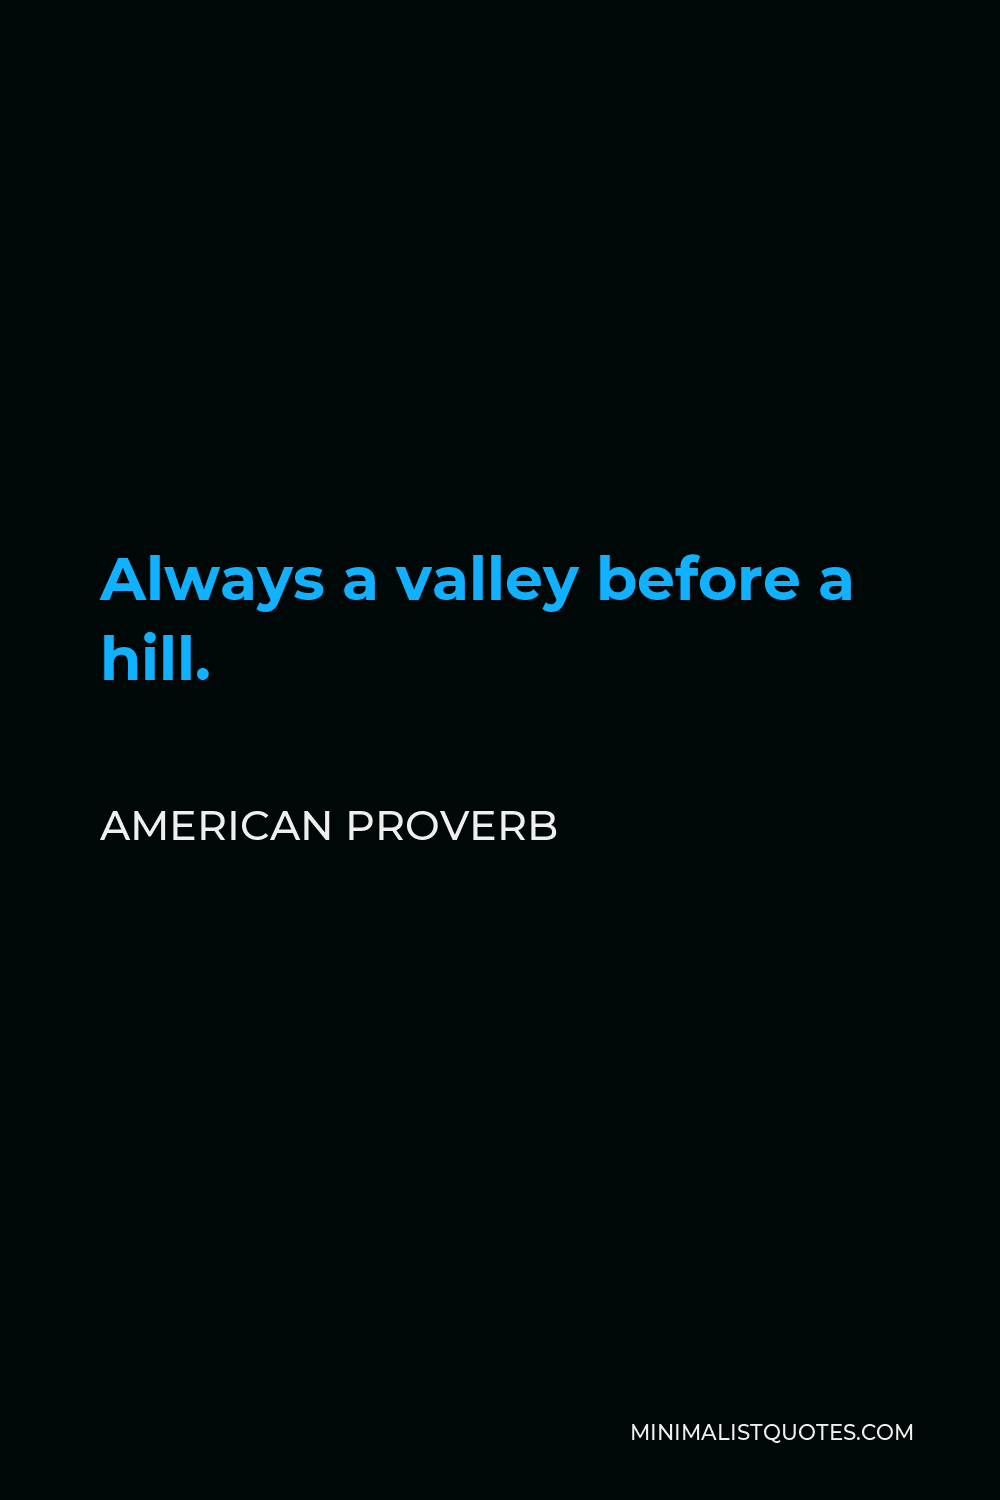 American Proverb Quote - Always a valley before a hill.